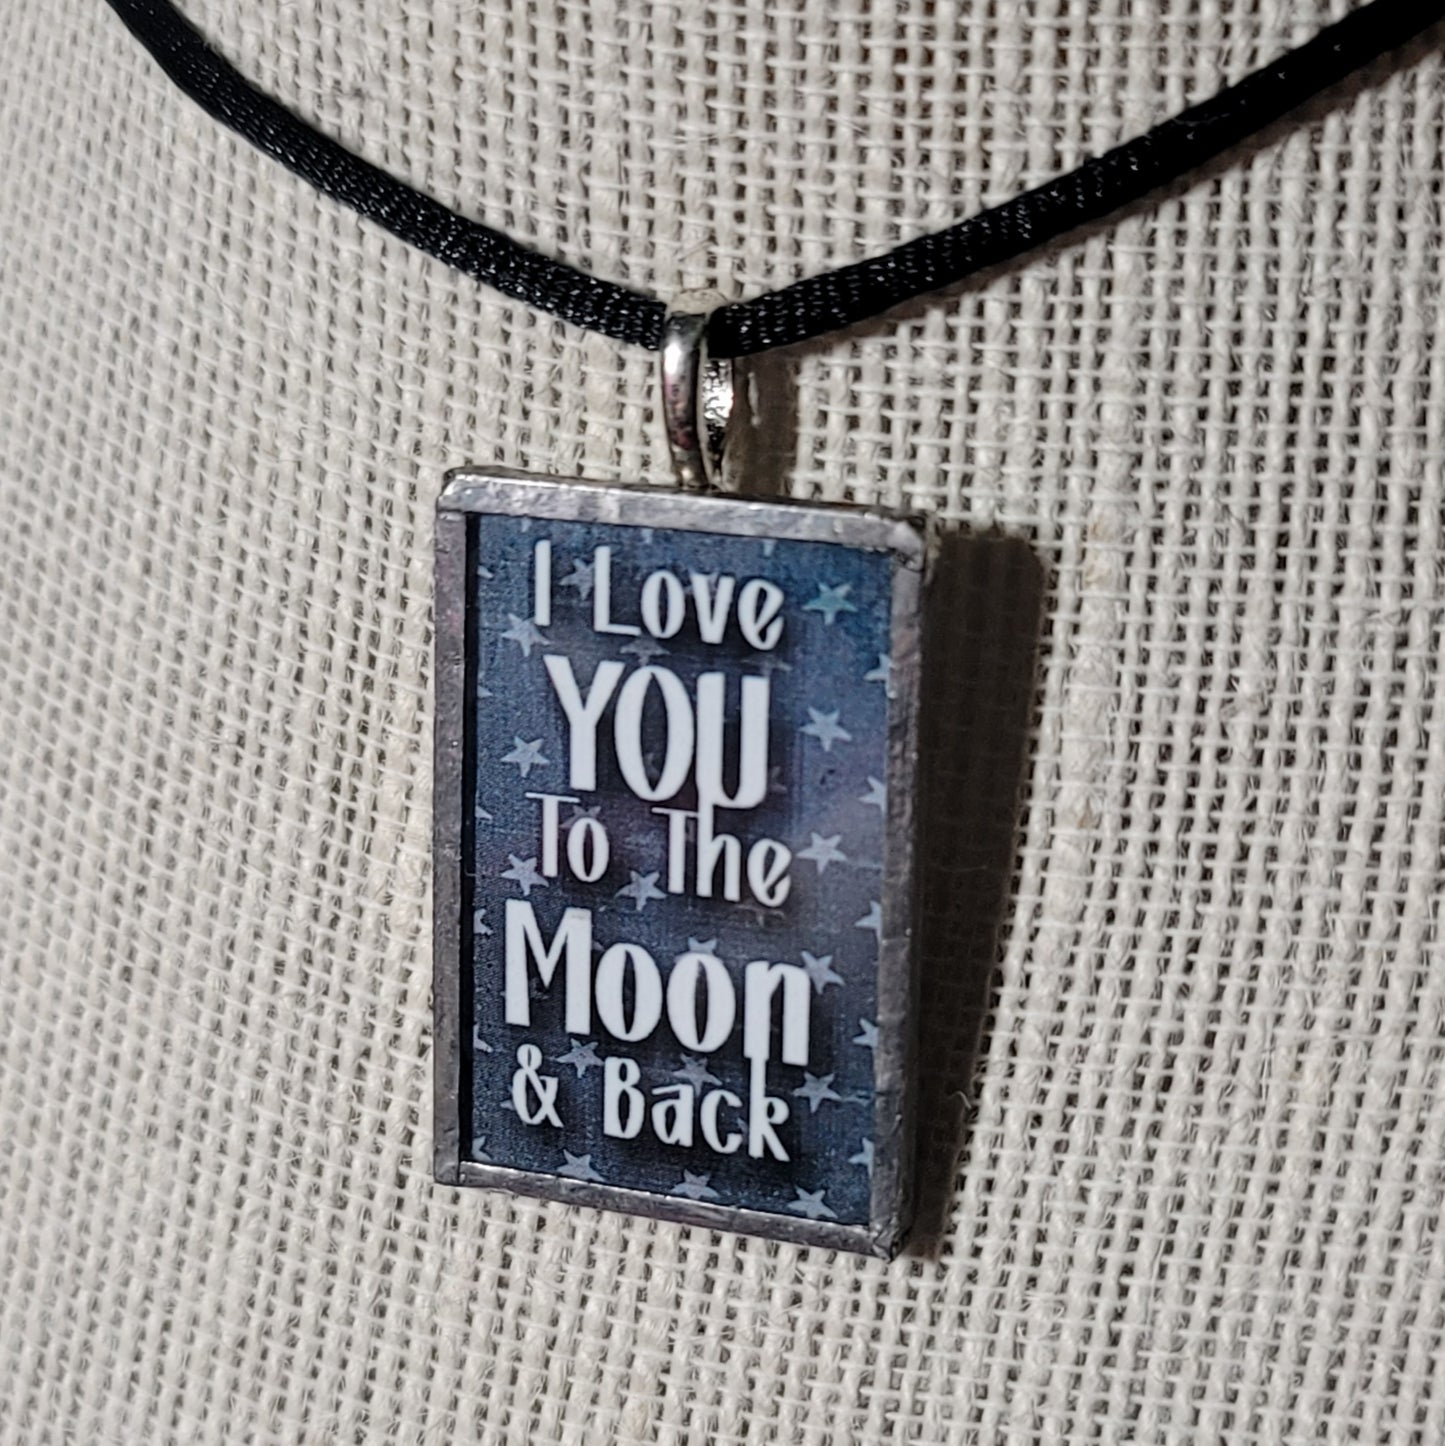 I Love You To The Moon & Back Handmade Stained-Glass Pendant